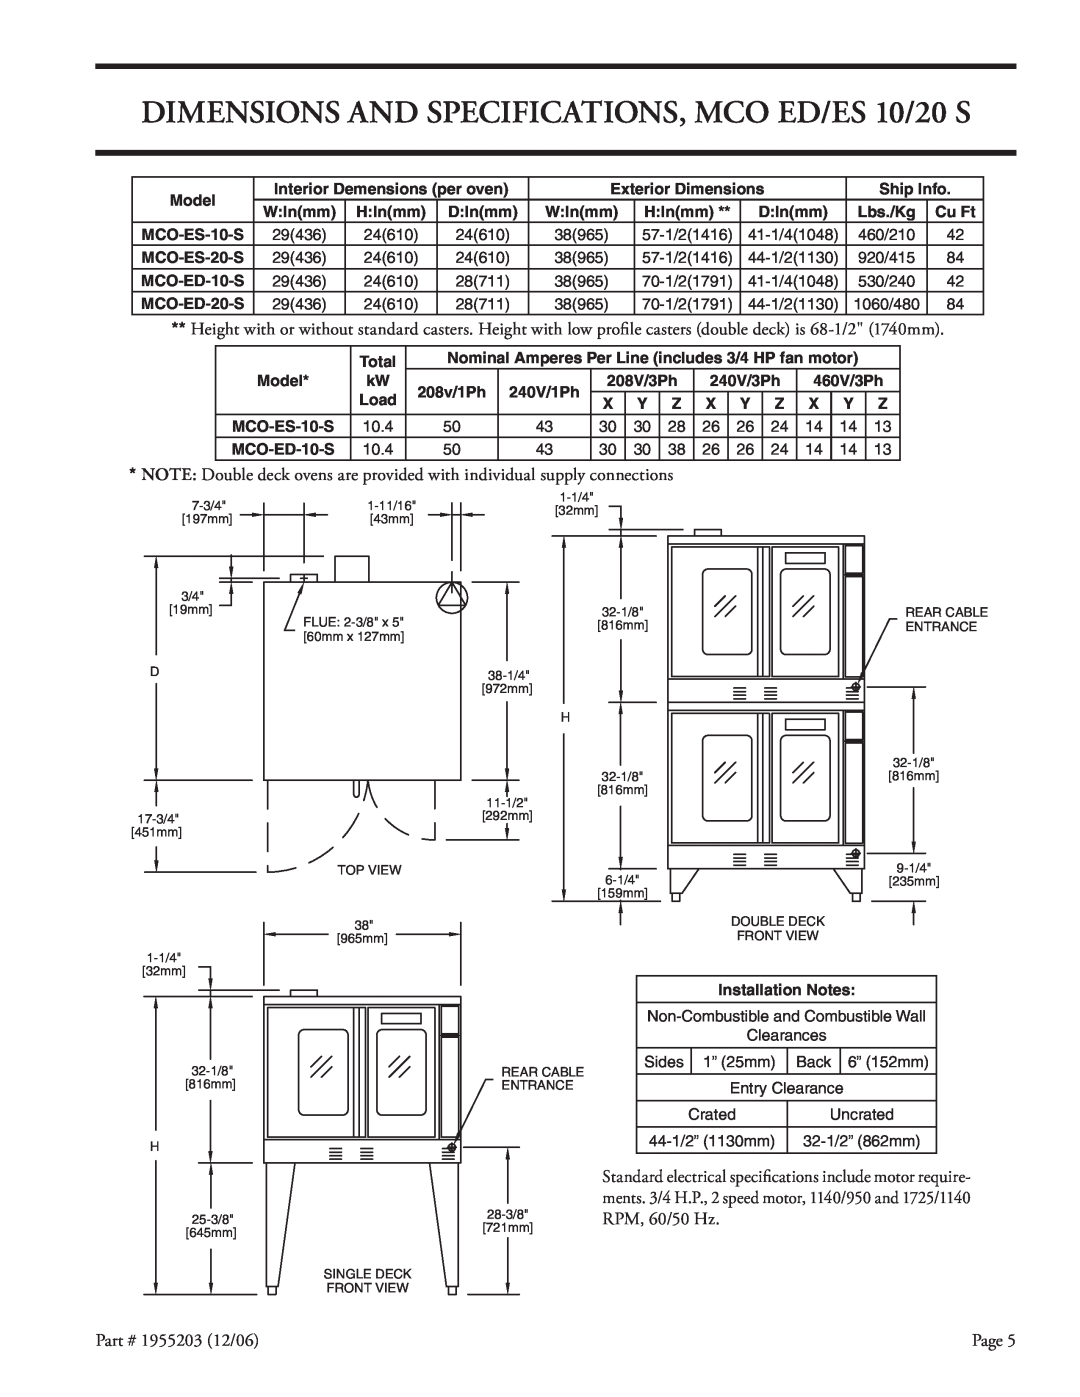 Garland Convection Microwave Oven installation instructions DIMENSIONS AND SPECIFICATIONS, MCO ED/ES 10/20 S, RPM, 60/50 Hz 